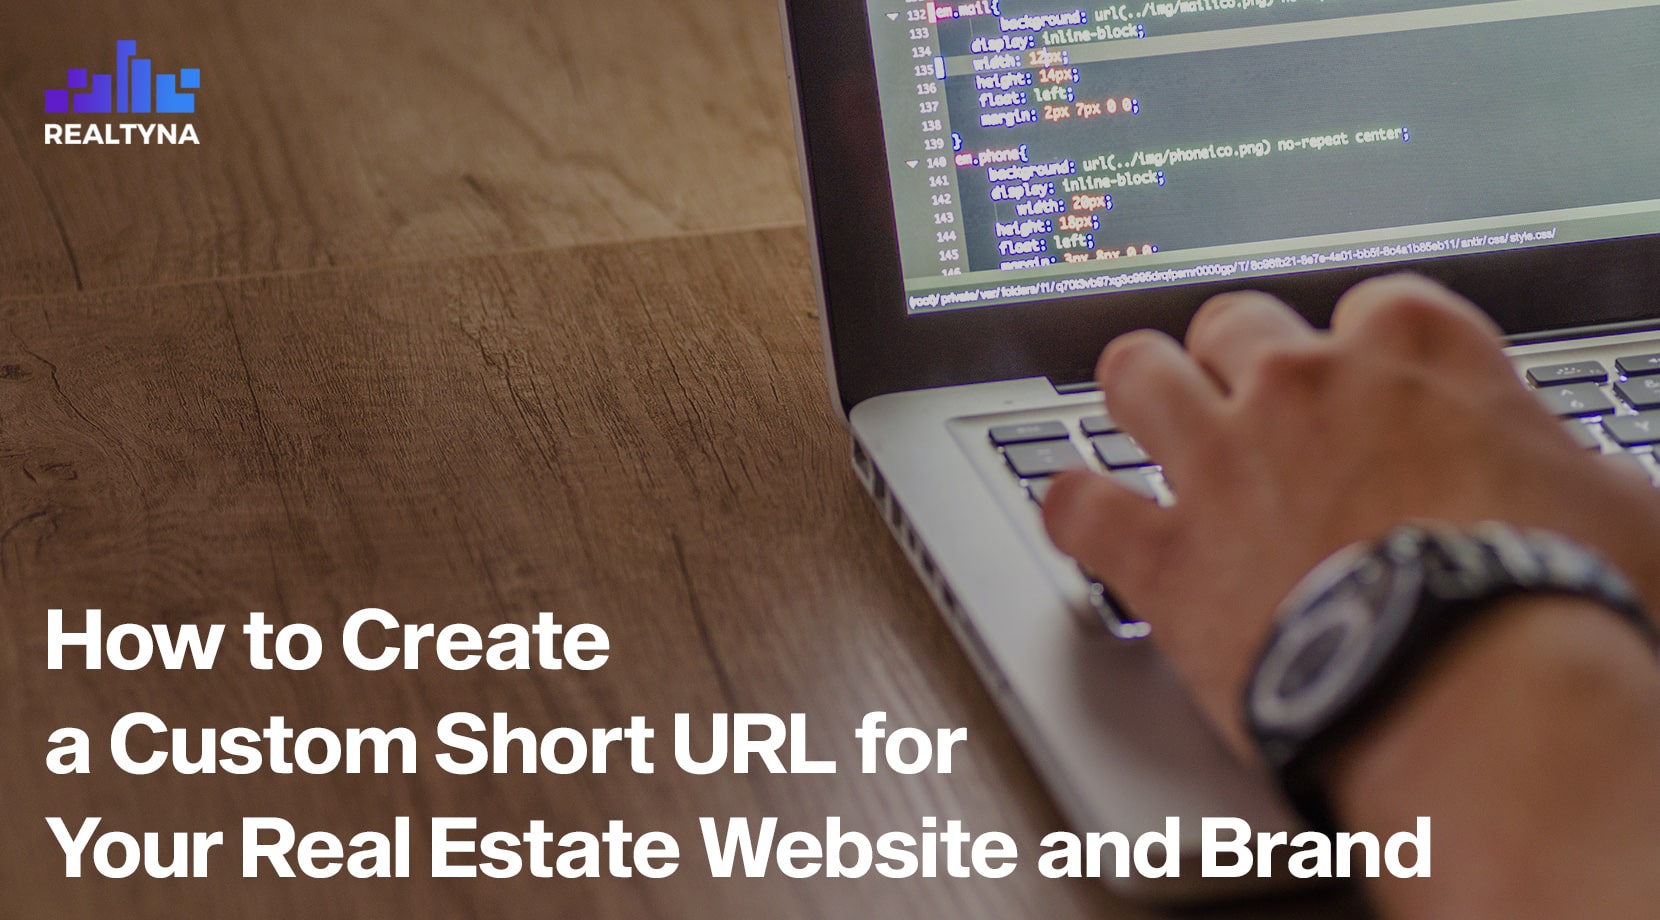 Custom Short URL for Real Estate Website and Brand: How to Create It